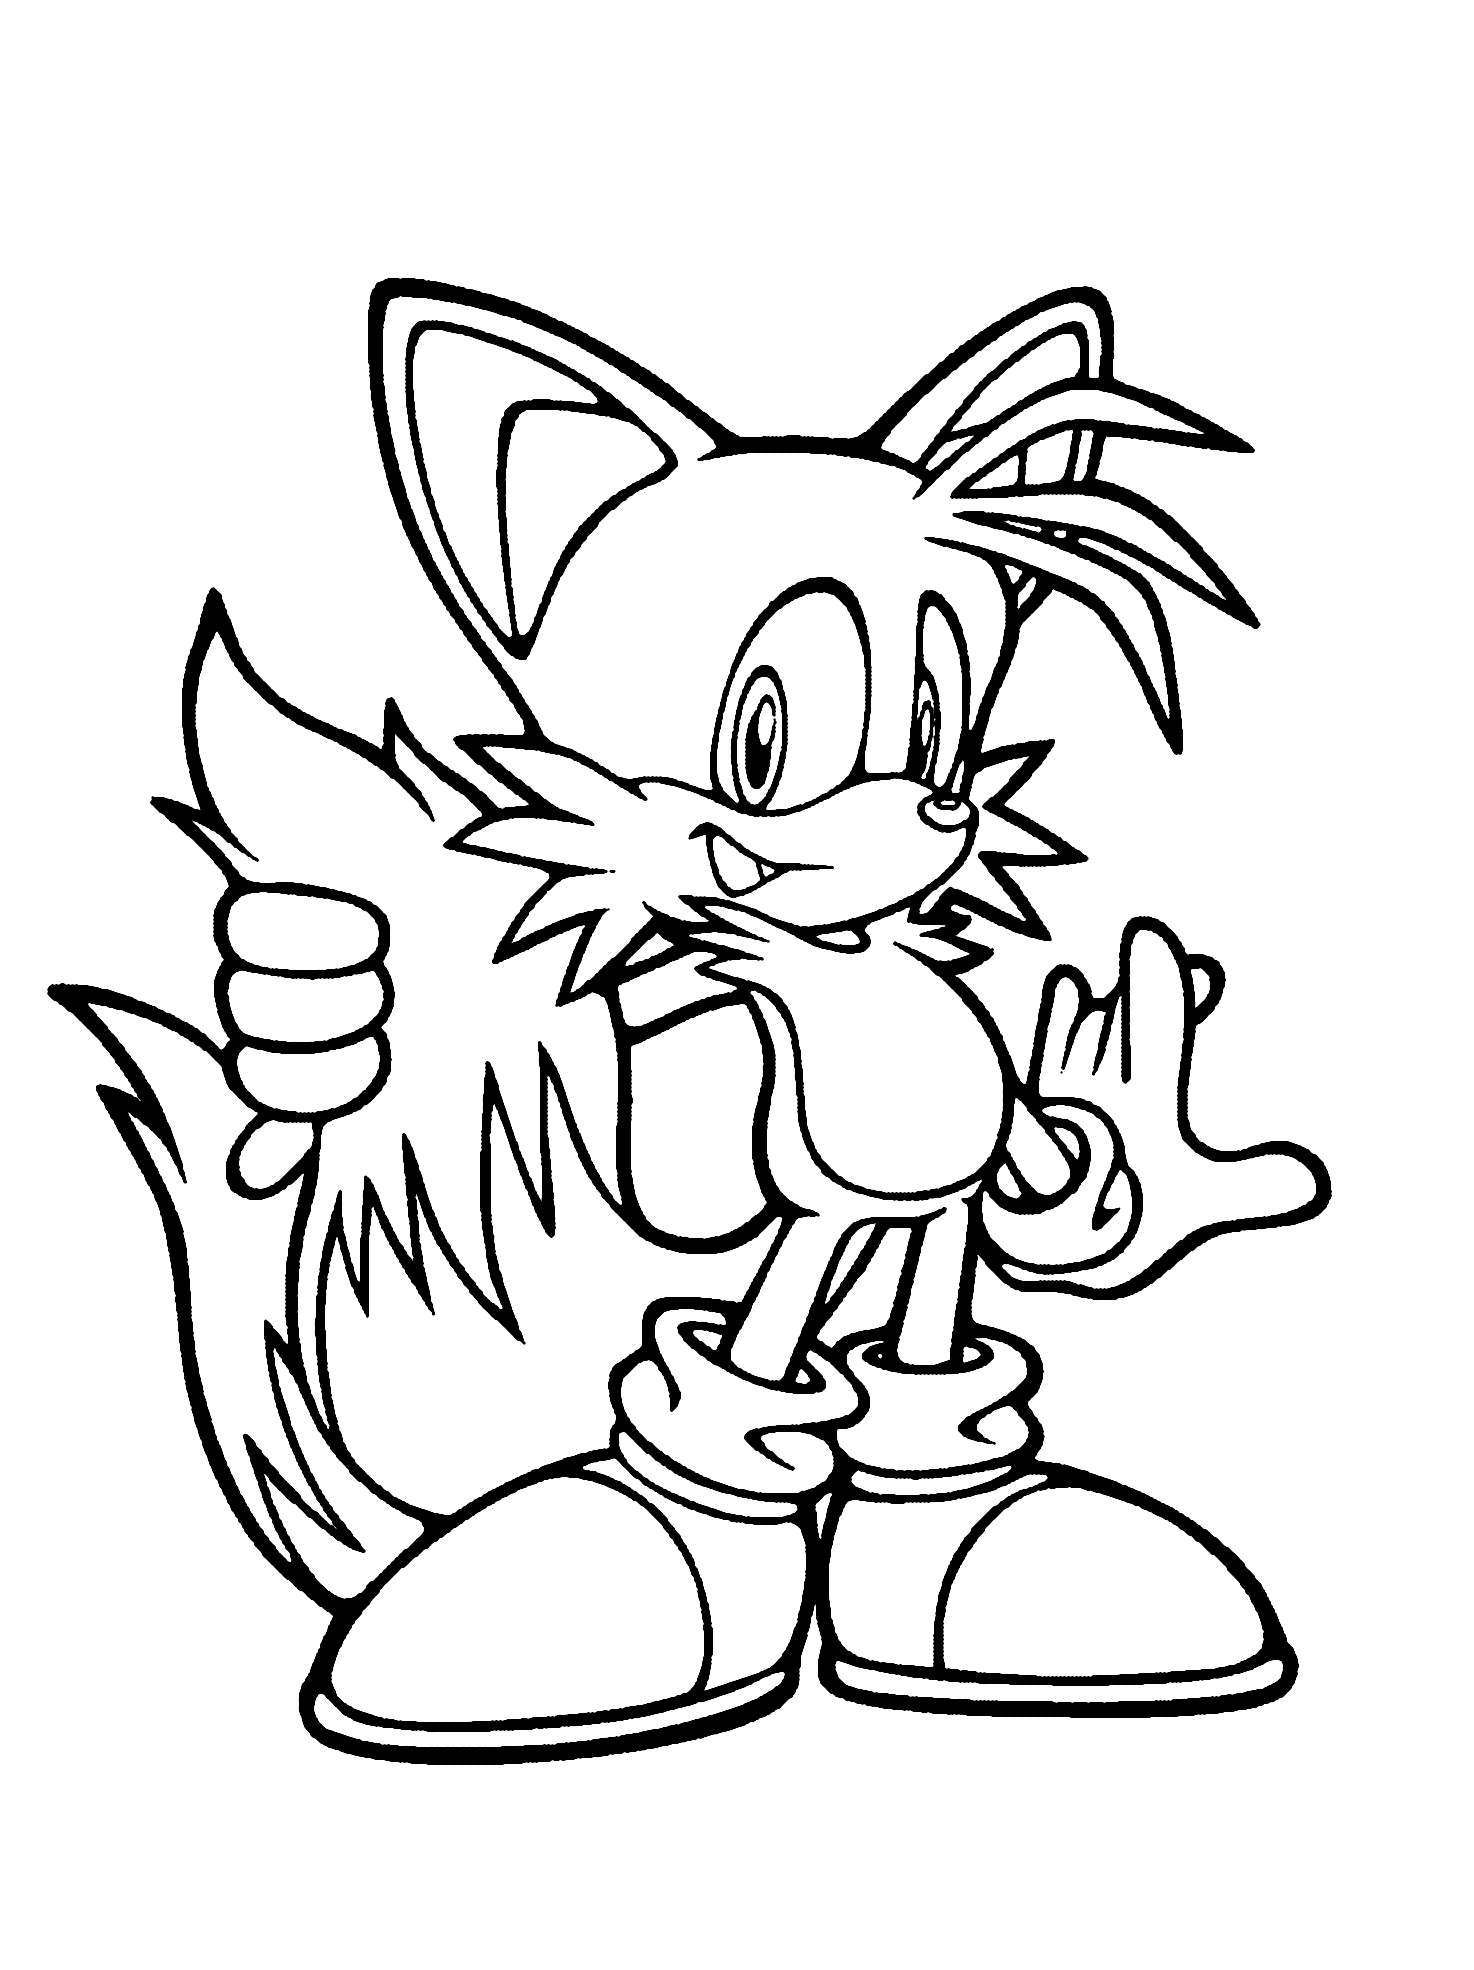 tails coloring pages tails with peace sign coloring page h m coloring pages pages tails coloring 